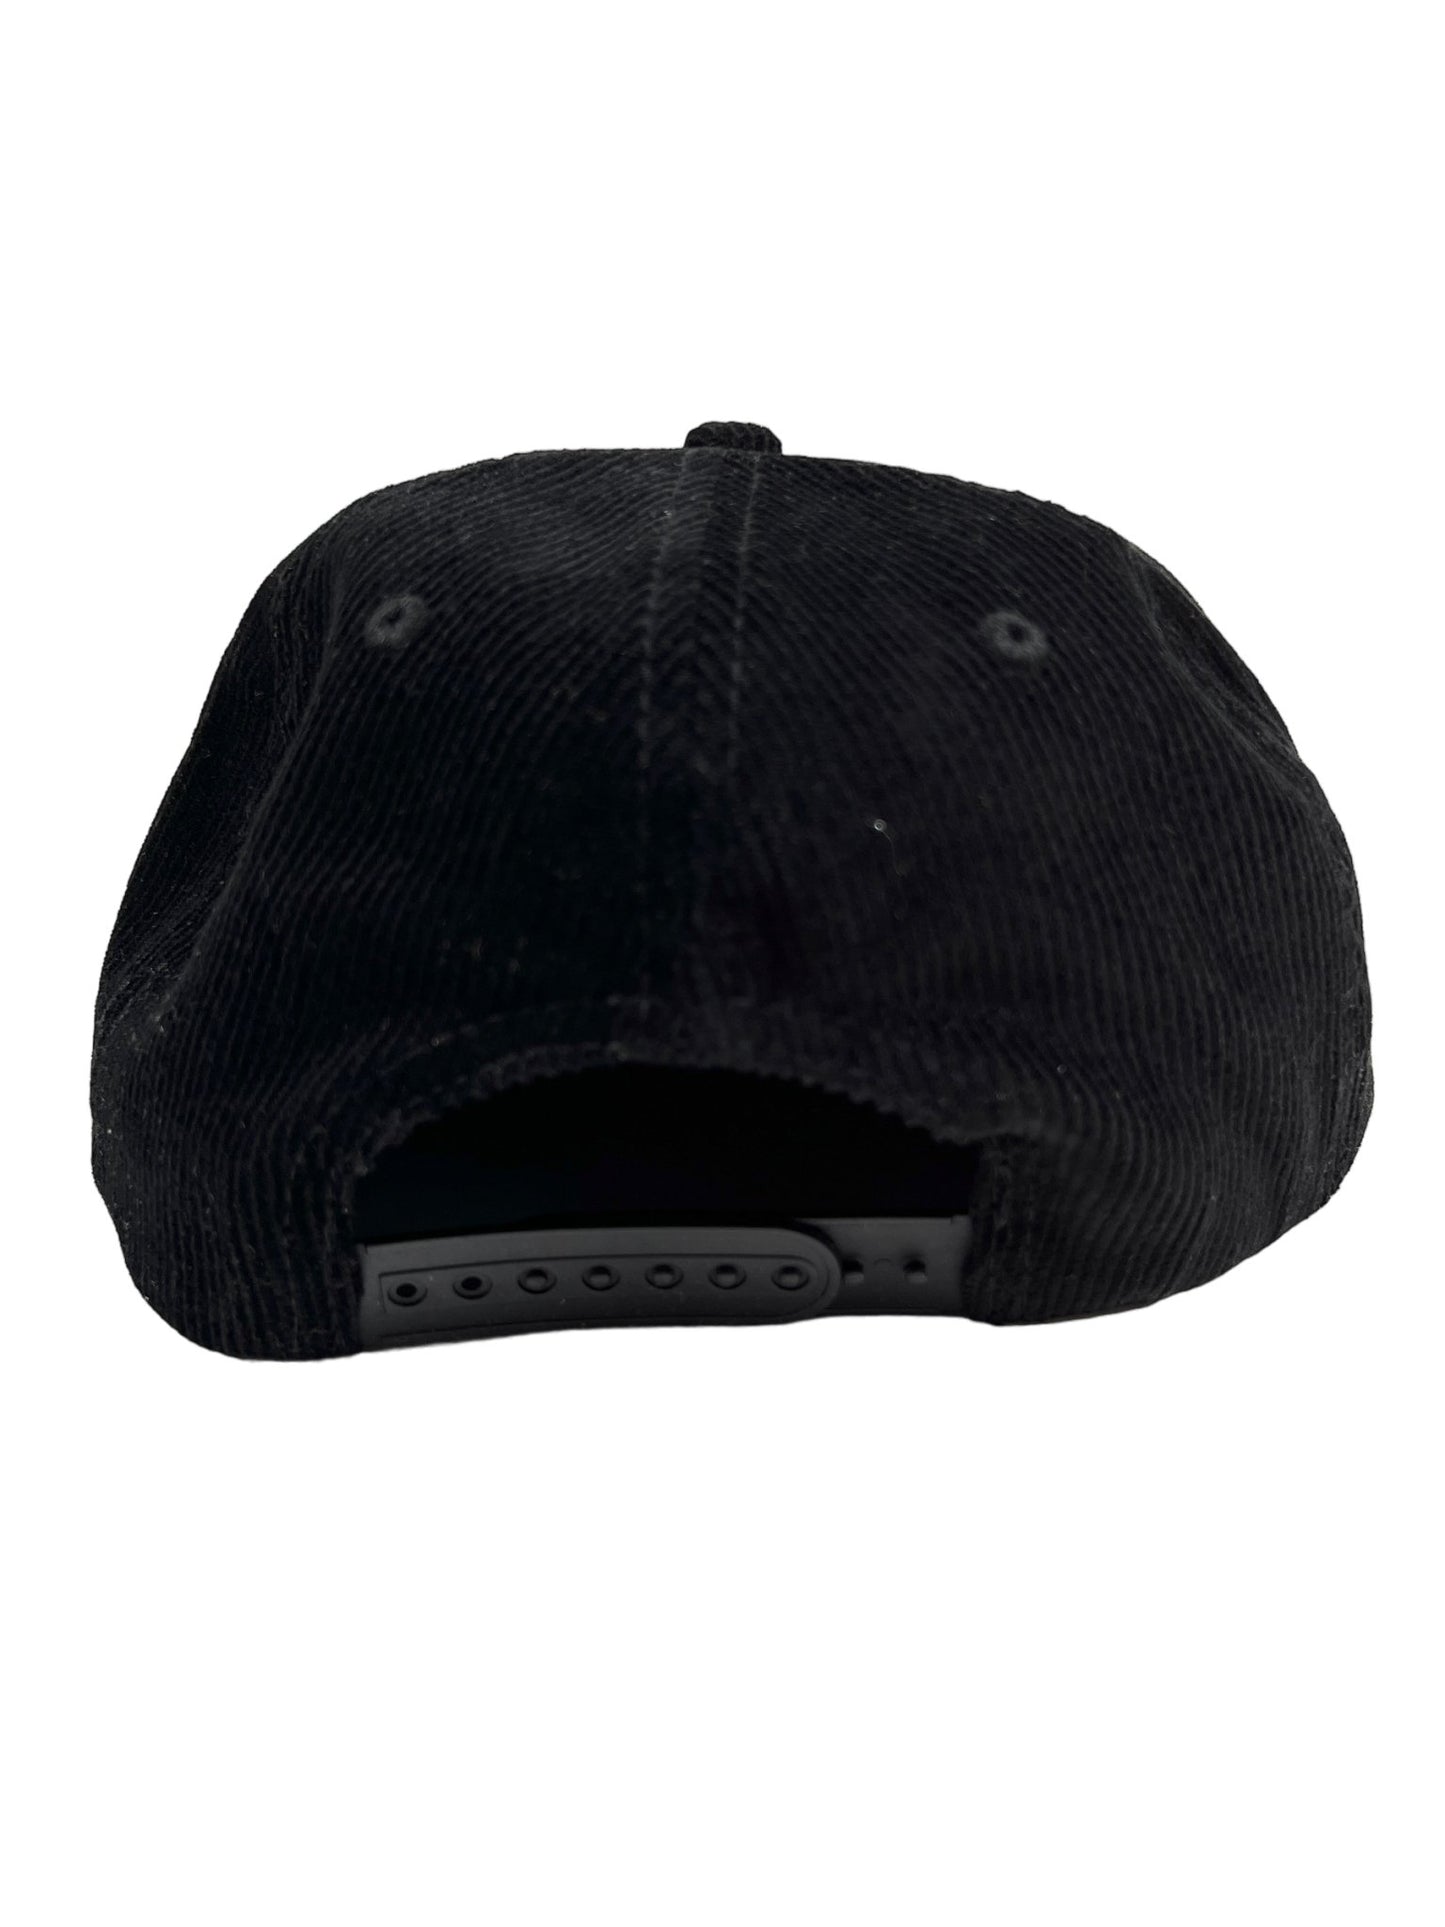 A PLEASURES black cotton corduroy snapback hat with an embroidered logo on a white background.